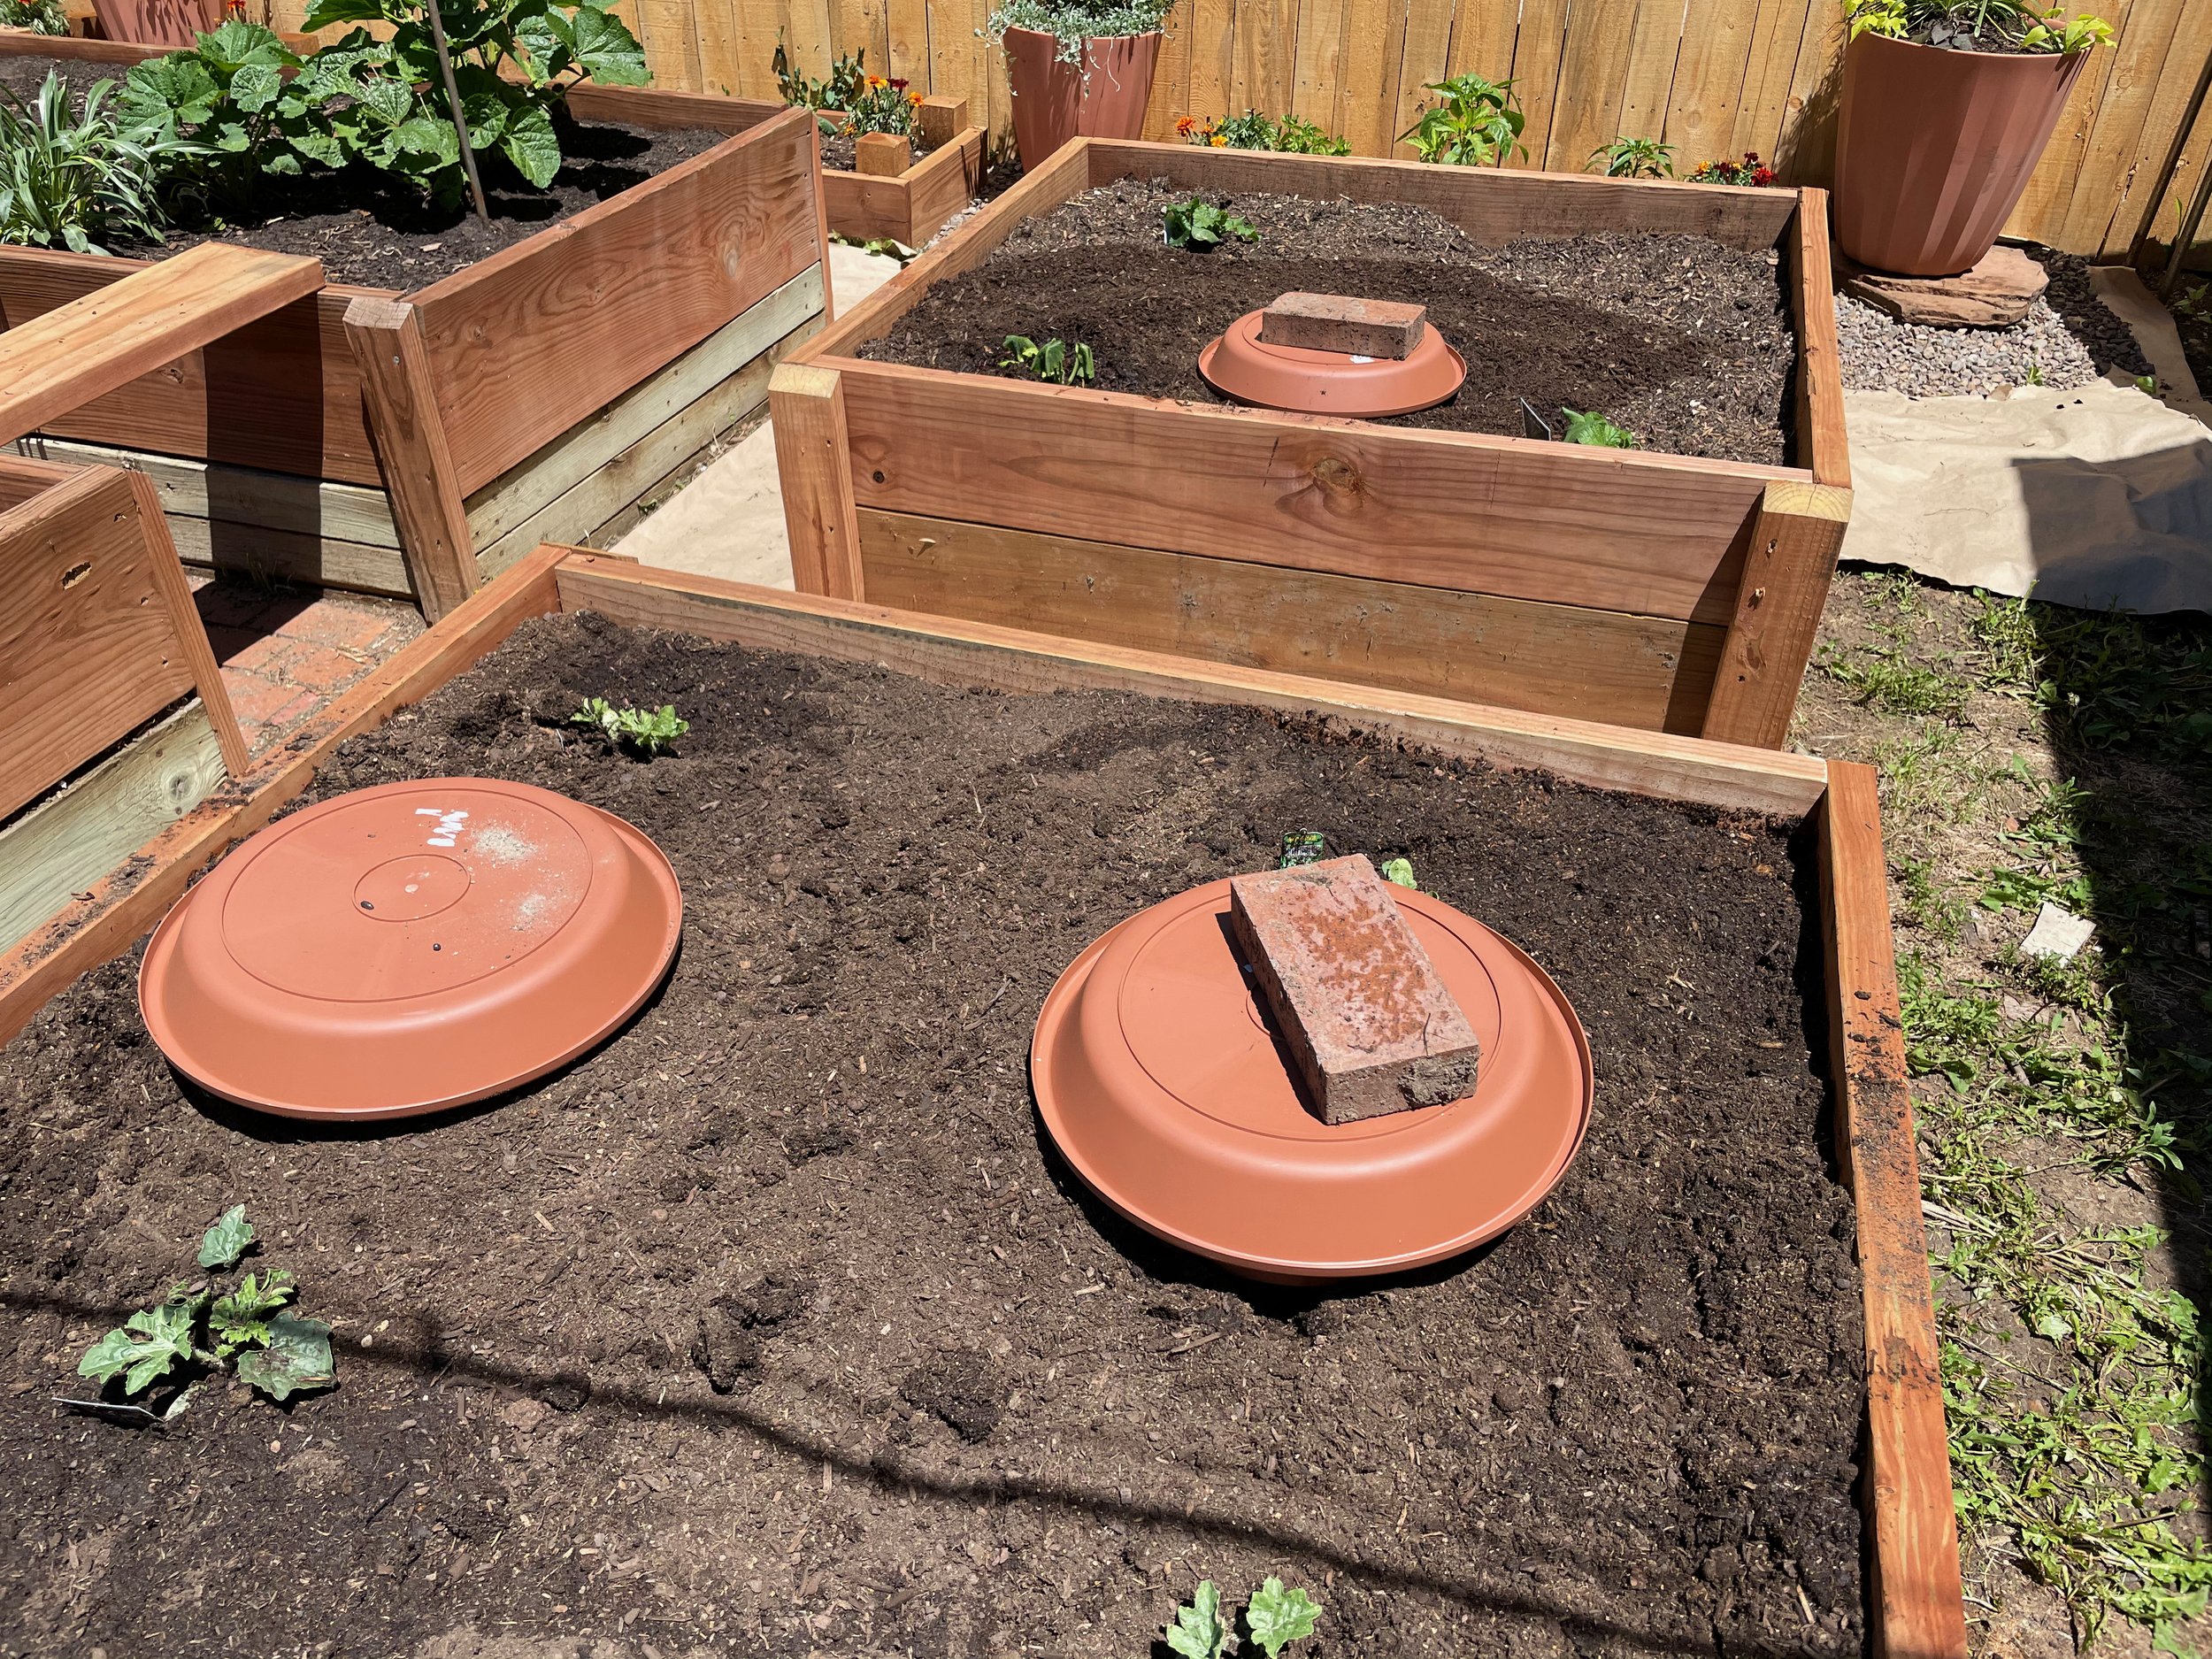 Olla Pots: Self-Watering Irrigation System for Modern Gardening